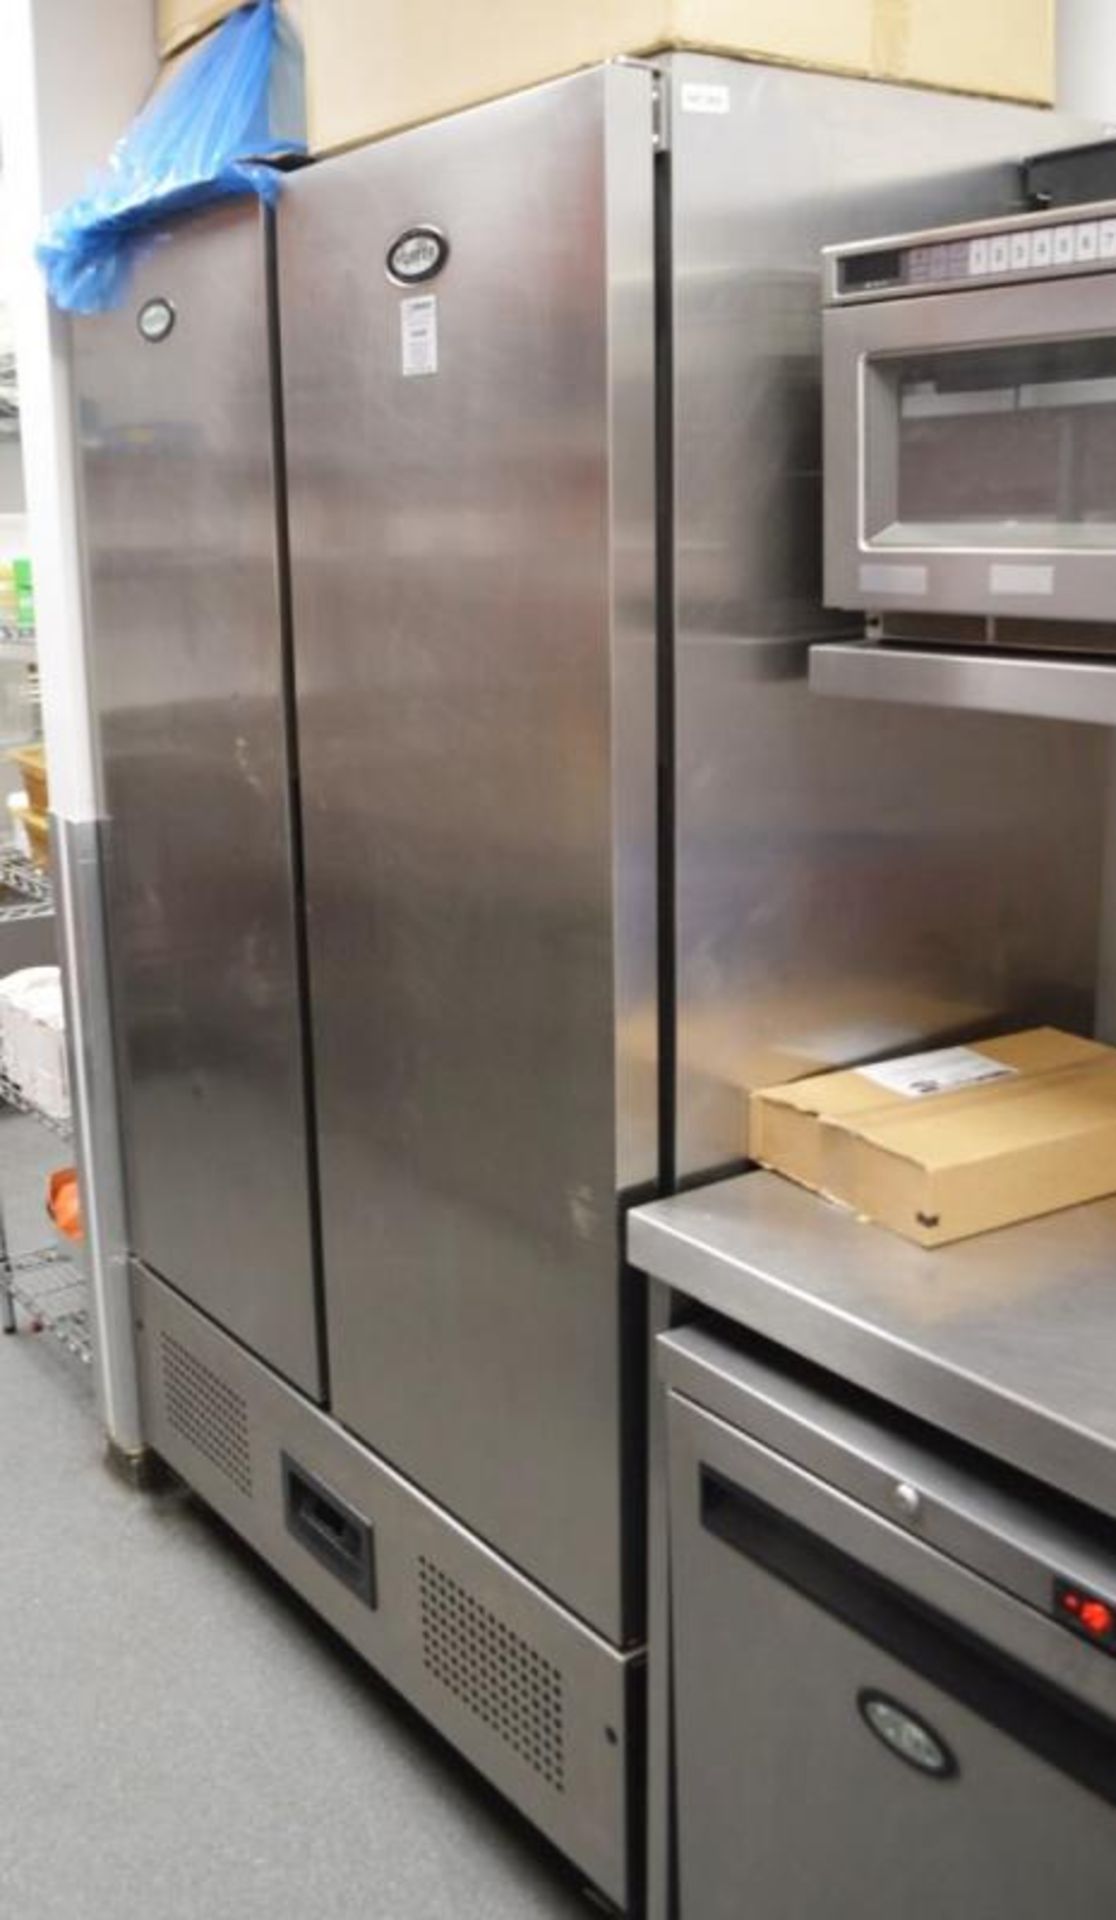 1 x Foster 800 Litre Double Door Meat Fridge With Stainless Steel Finish - Model FSL800M - Ref NC360 - Image 3 of 6